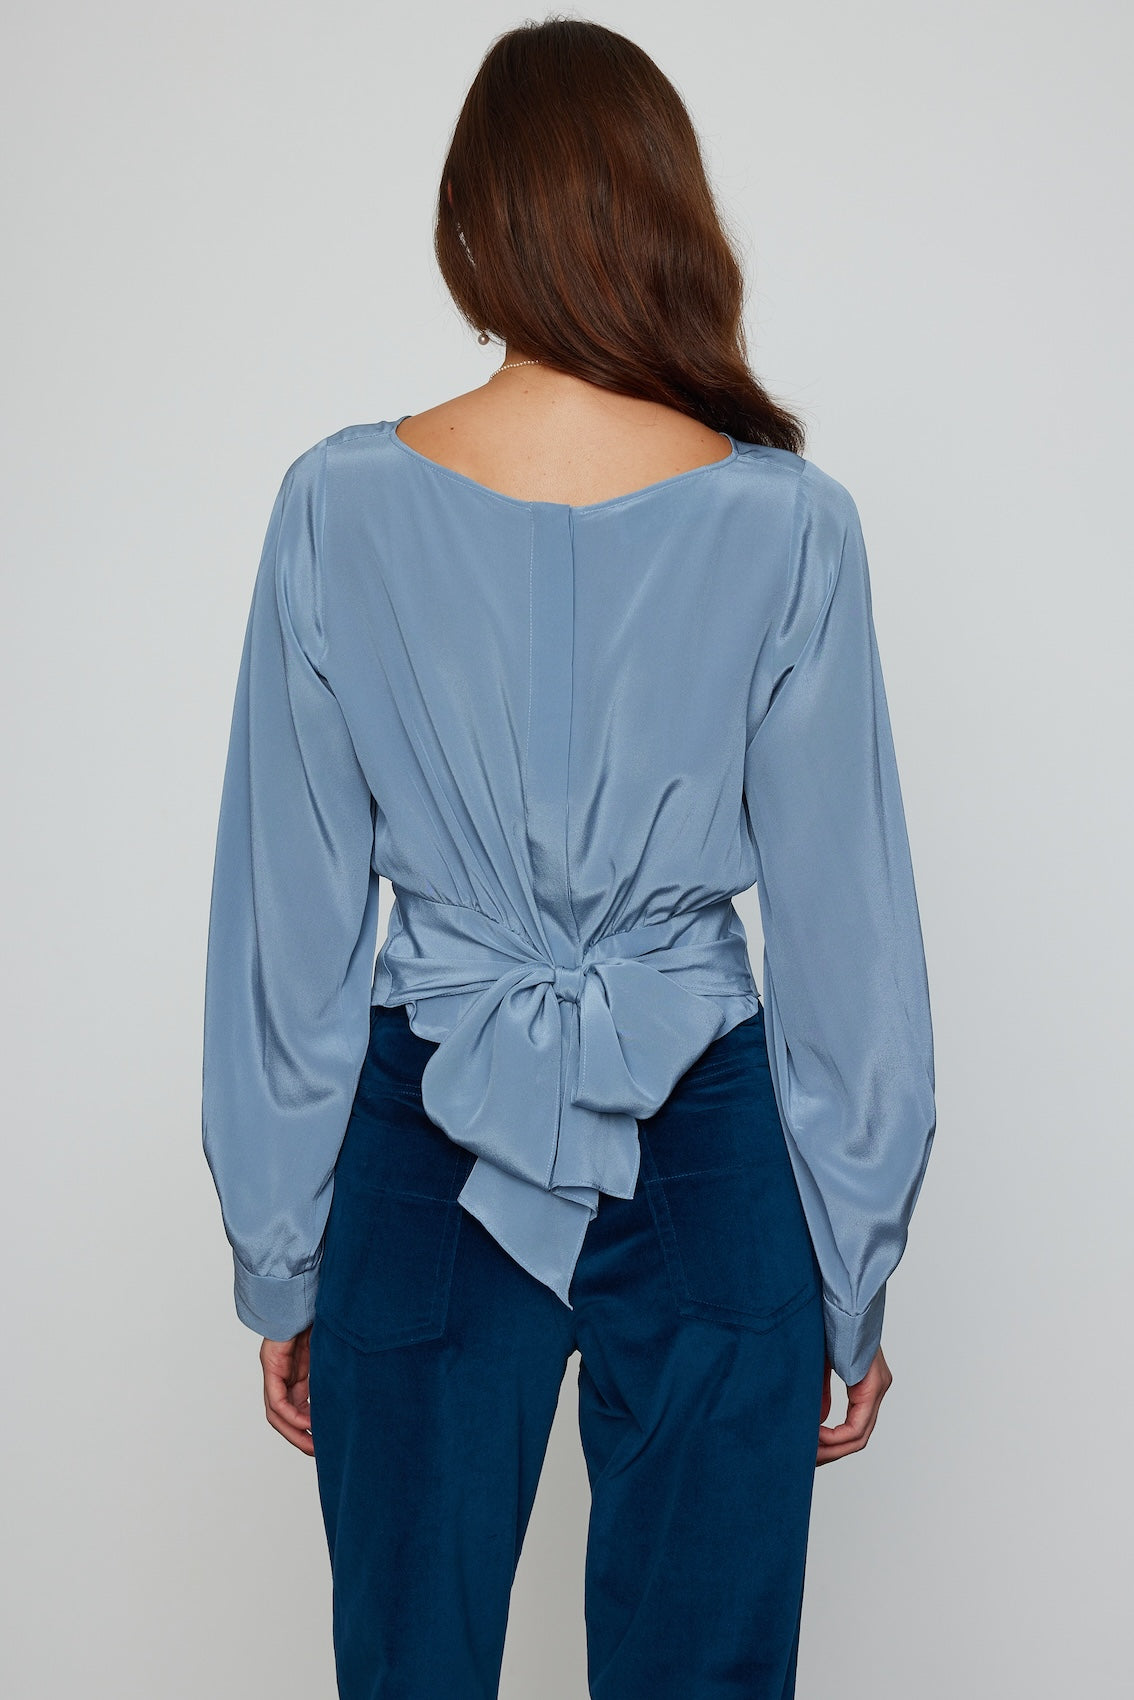 Caro Editions Olga Shirt features a straight neckline and our signature long draped sleeves made from soft crepe de chine silk. This shirt has a large bow at the back, which can be adjusted to fit perfectly around the waist. Material: 100% Silk.